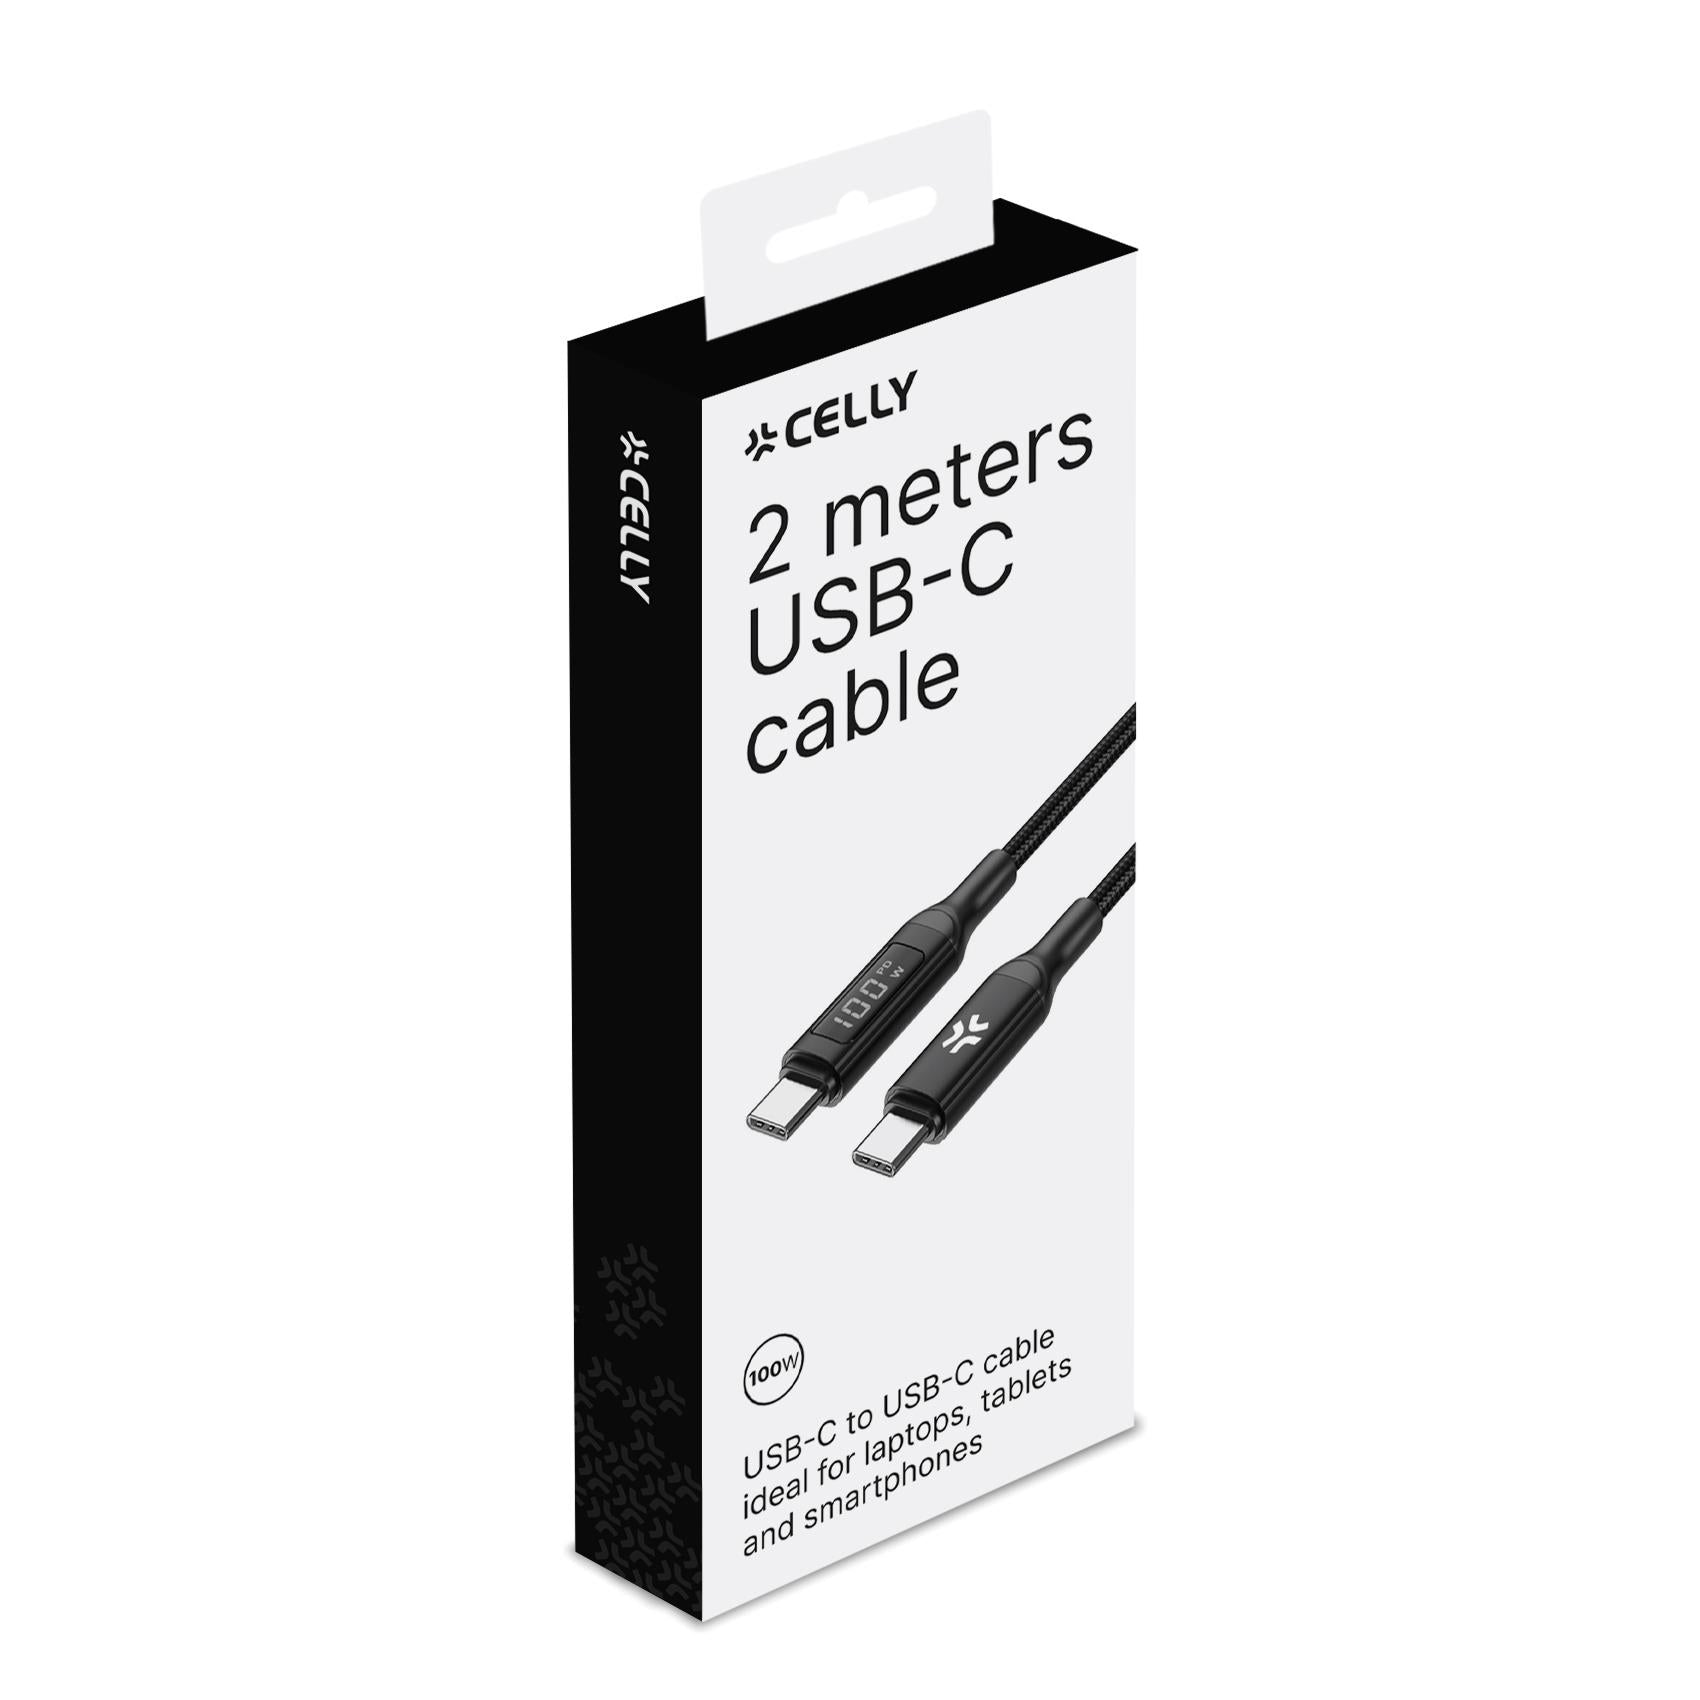 Celly USBCUSBC100WLED - 2m USB-C to USB-C Cable 100W with LED Display [POWER DELIVERY]